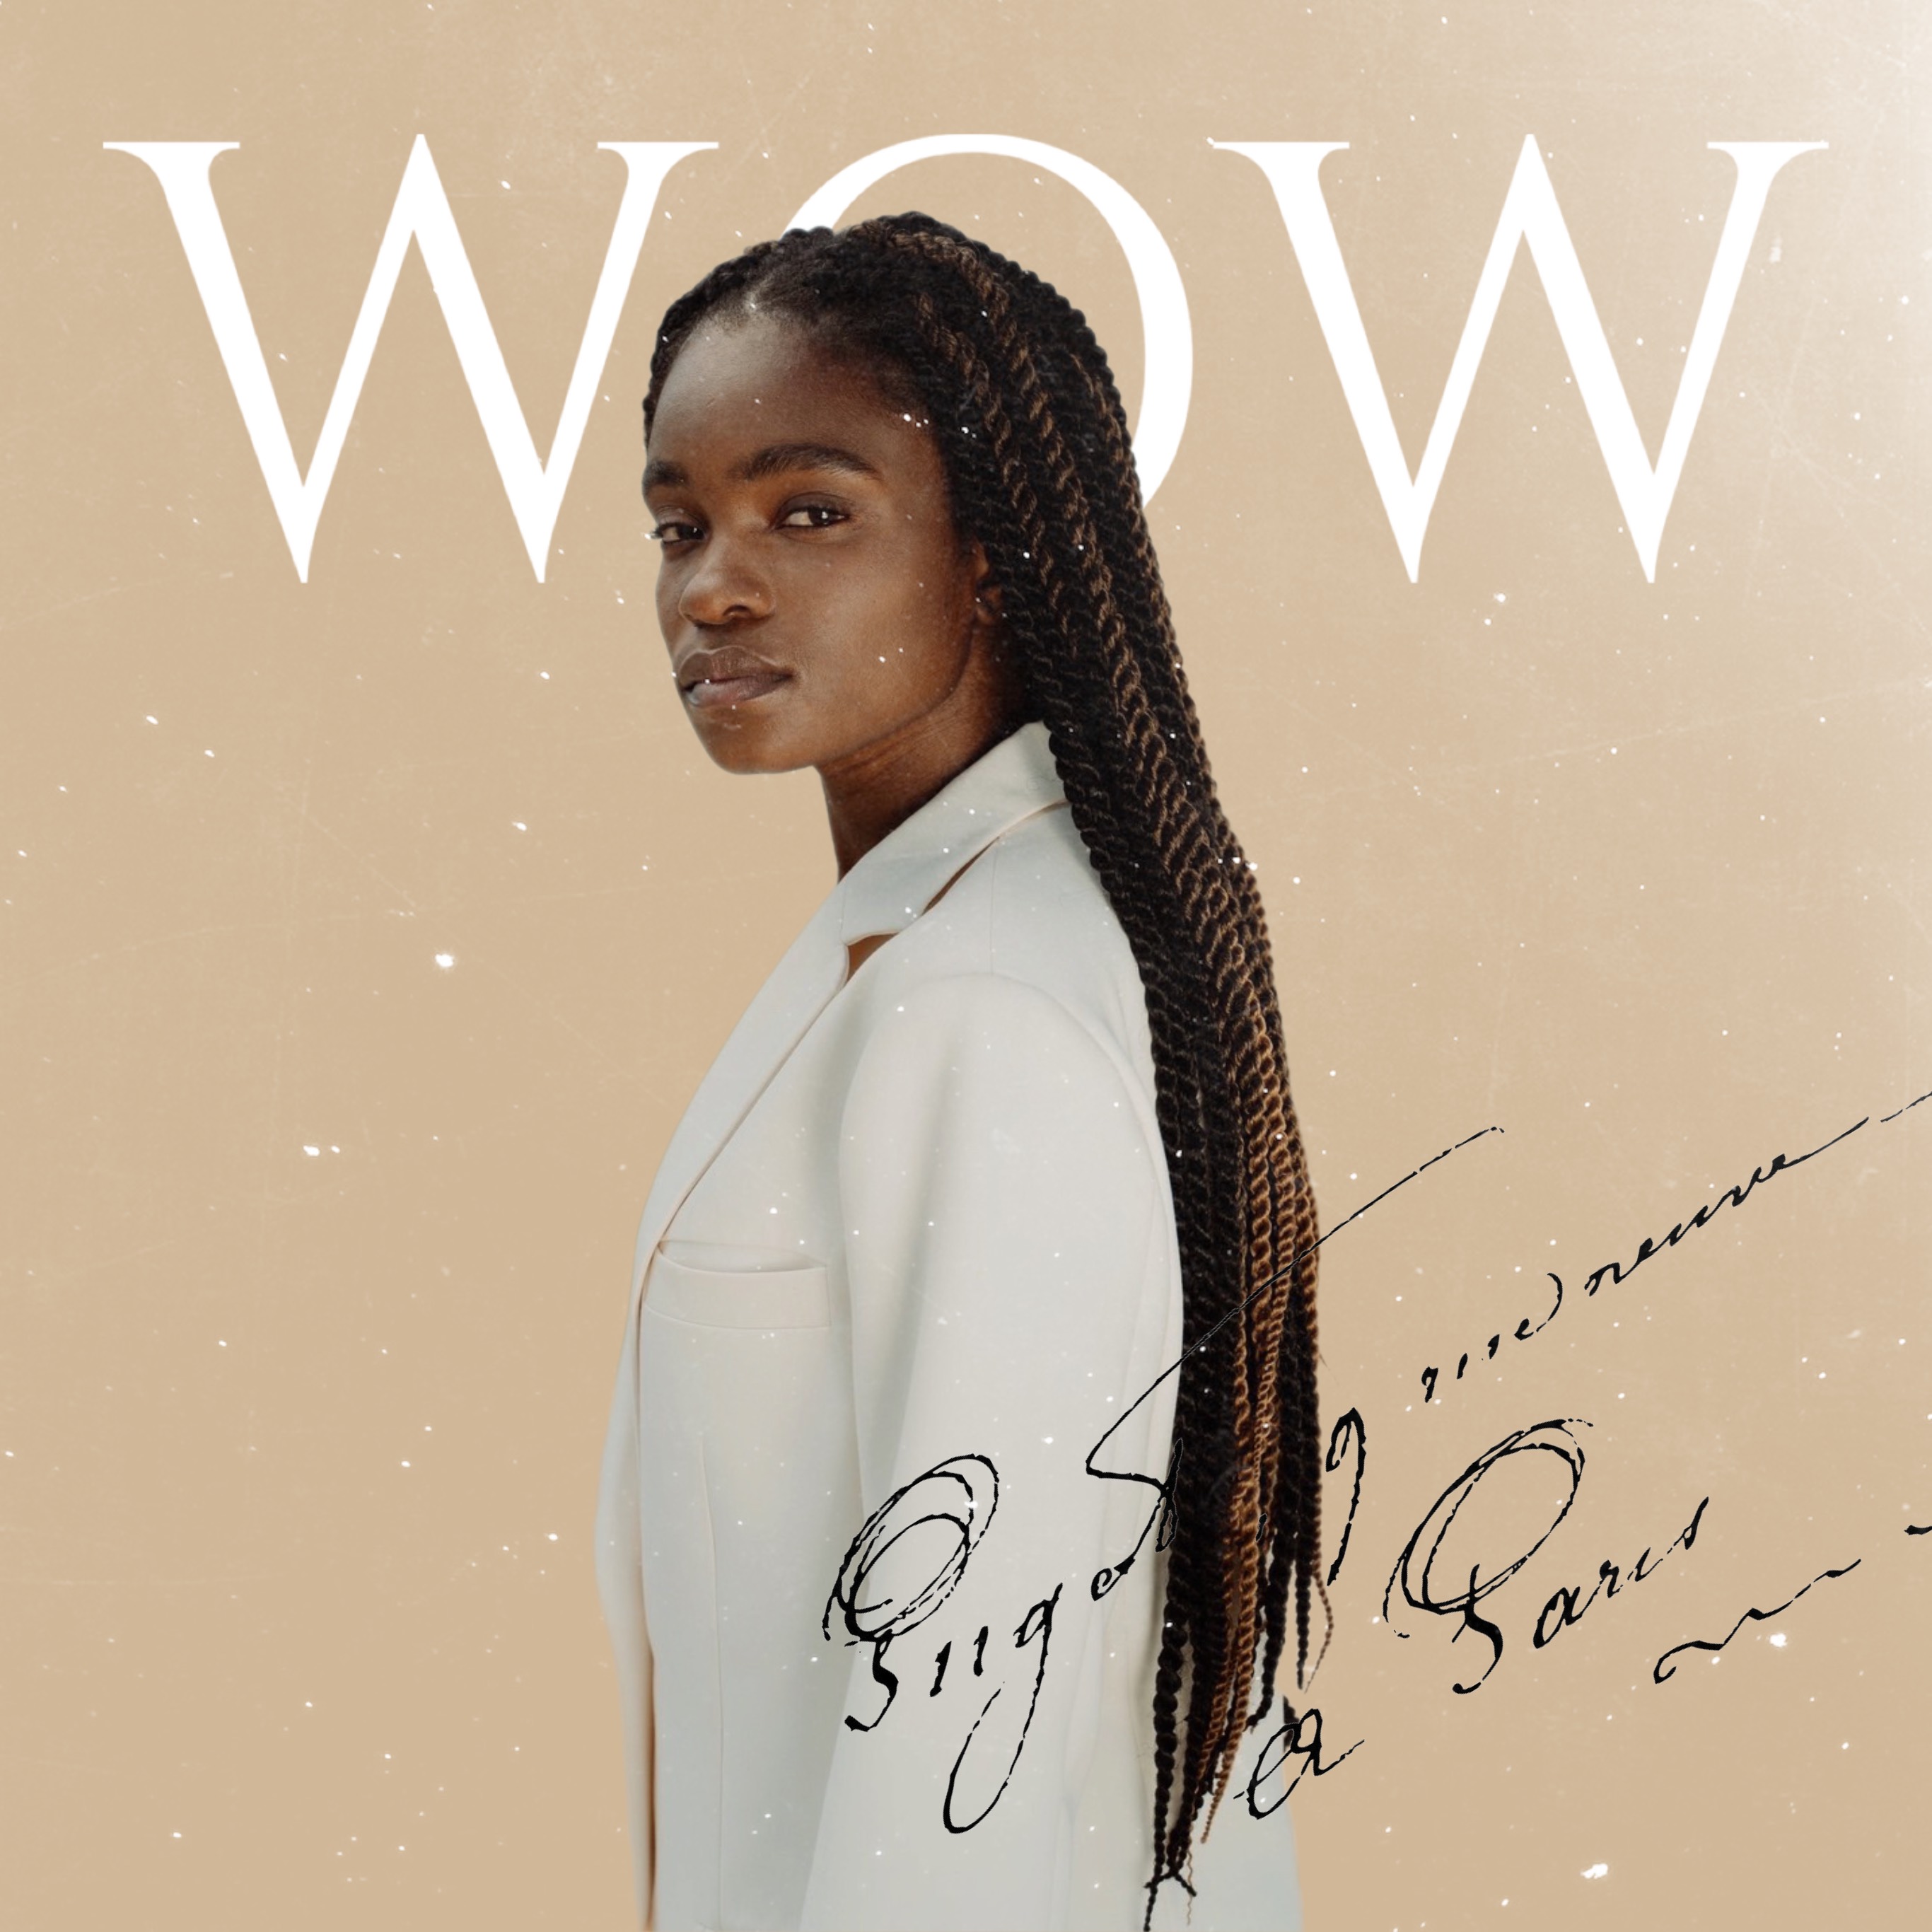 Profile Pic Of Woman With Long Hair And White Suit Behind A wow Background With Signature